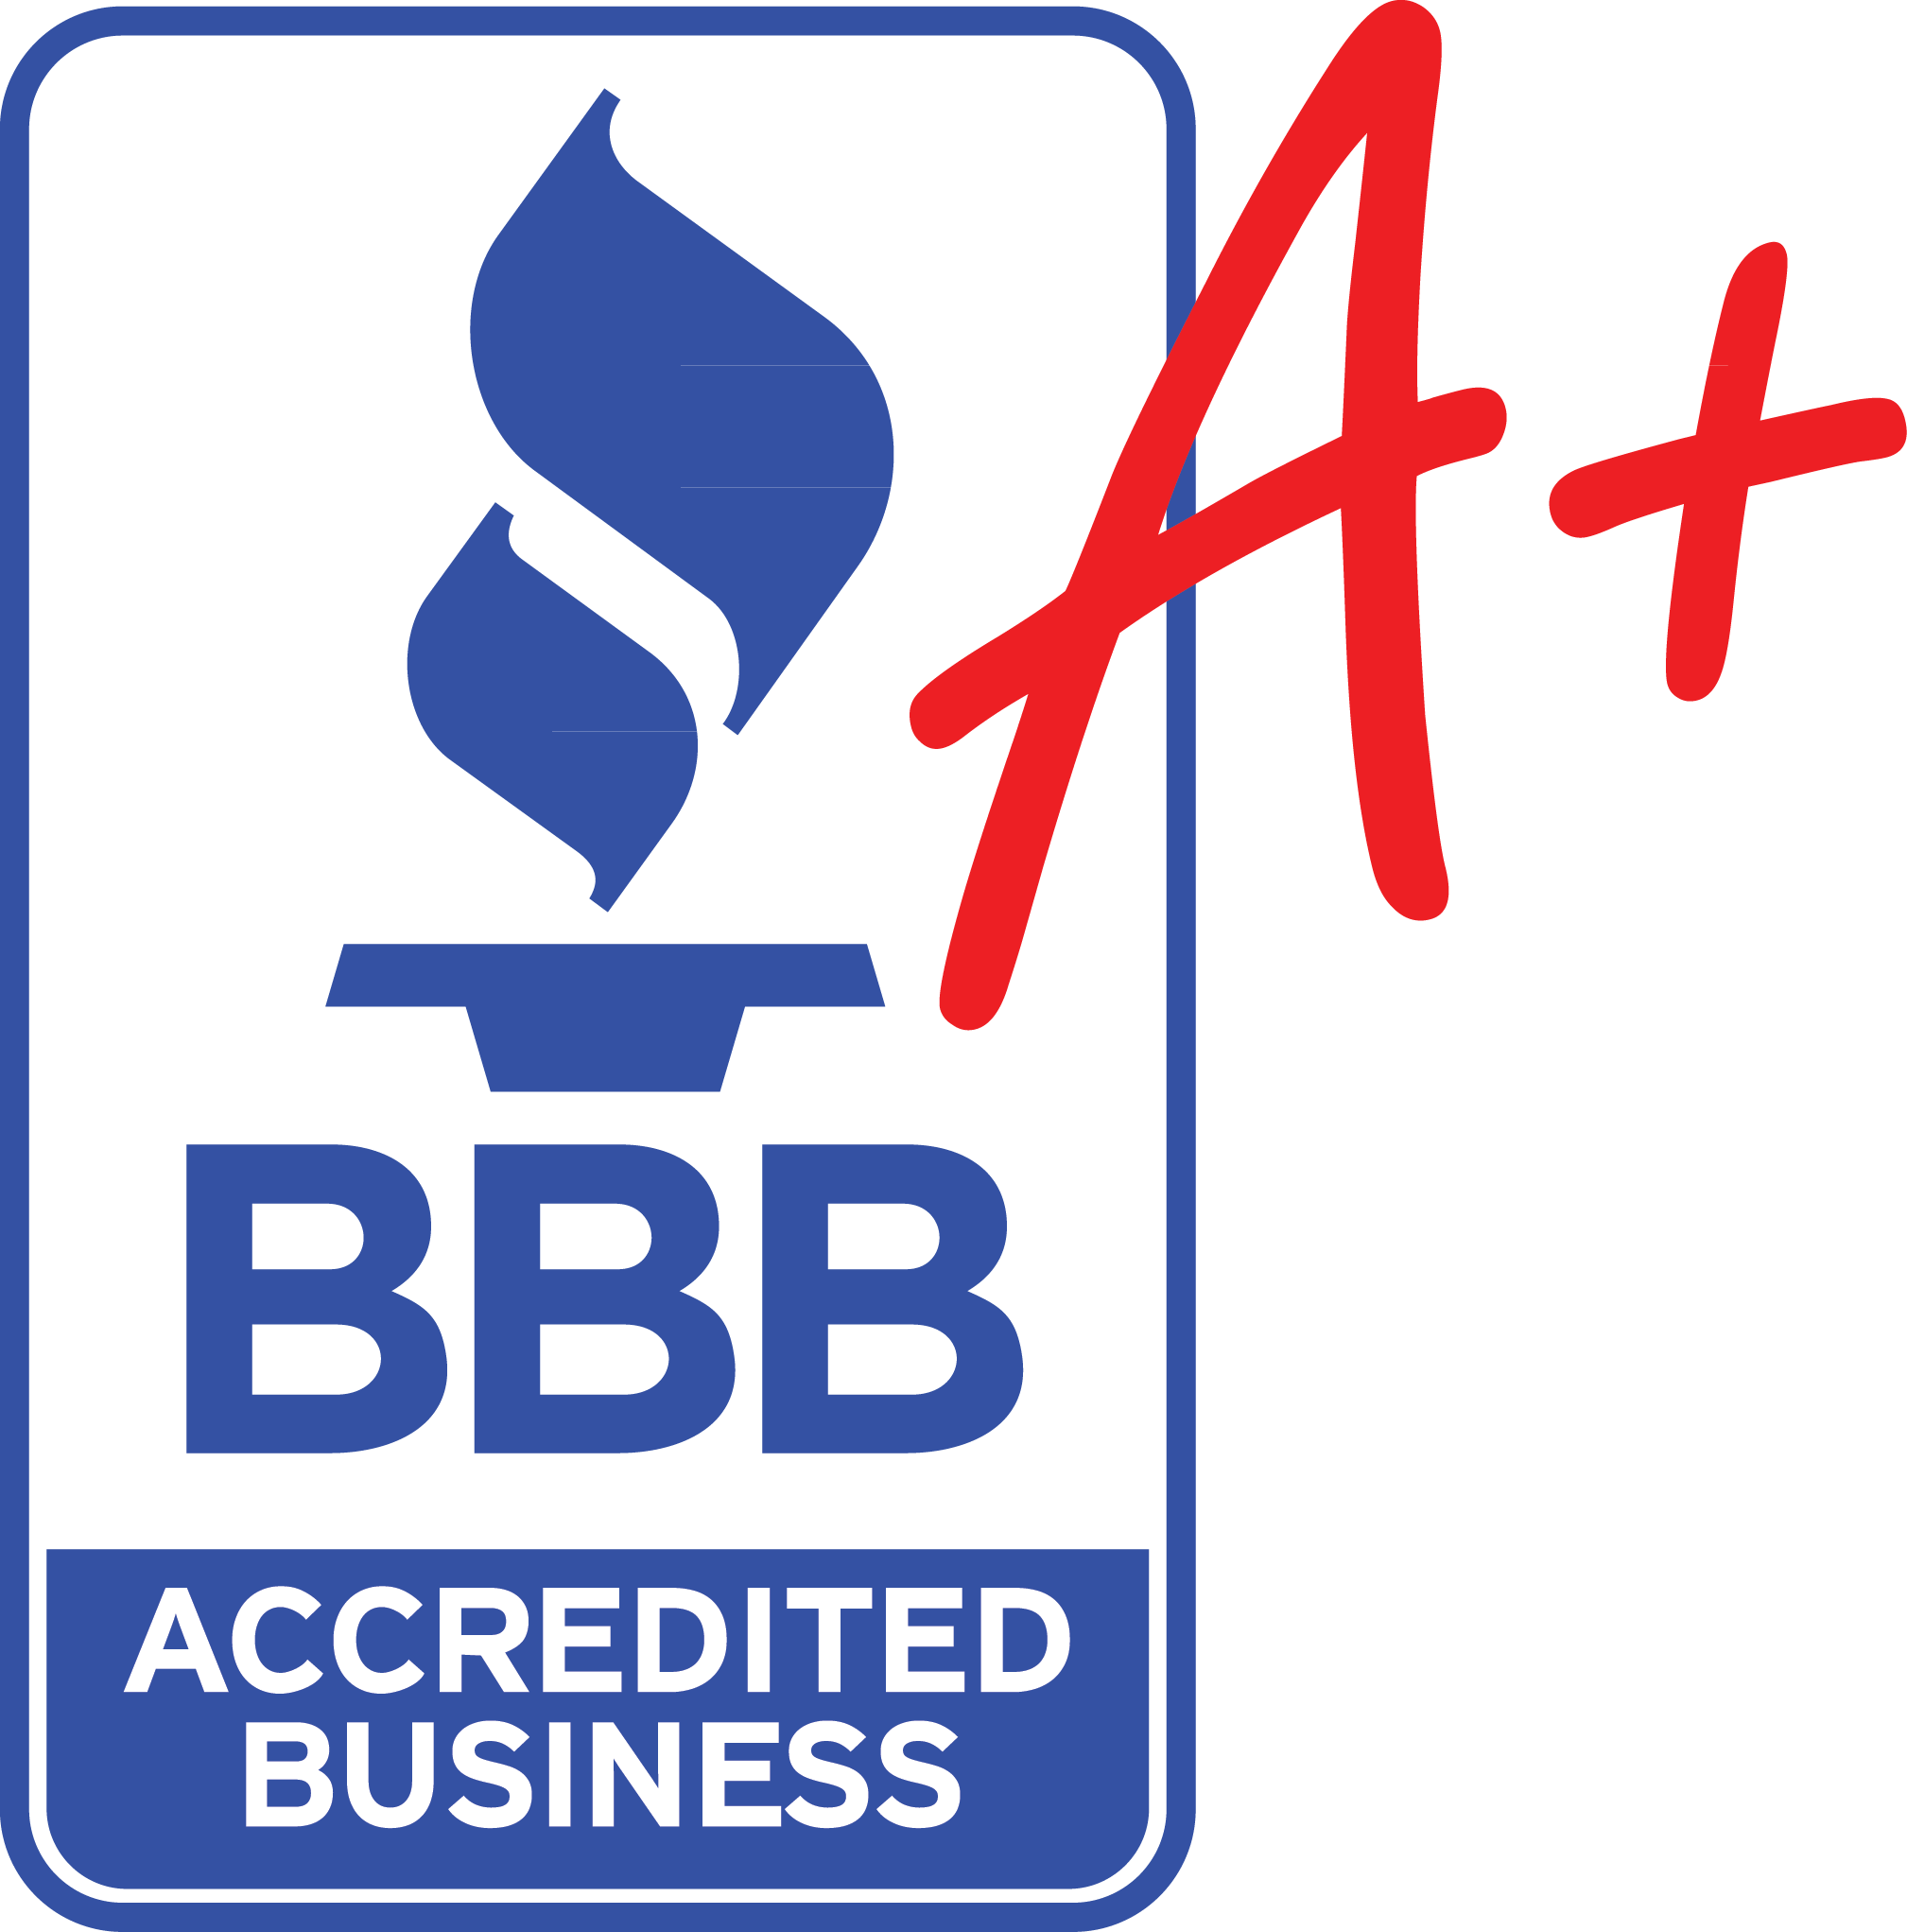 BBB Accredited Business Logo - Why Choose a BBB Accredited Car Service?